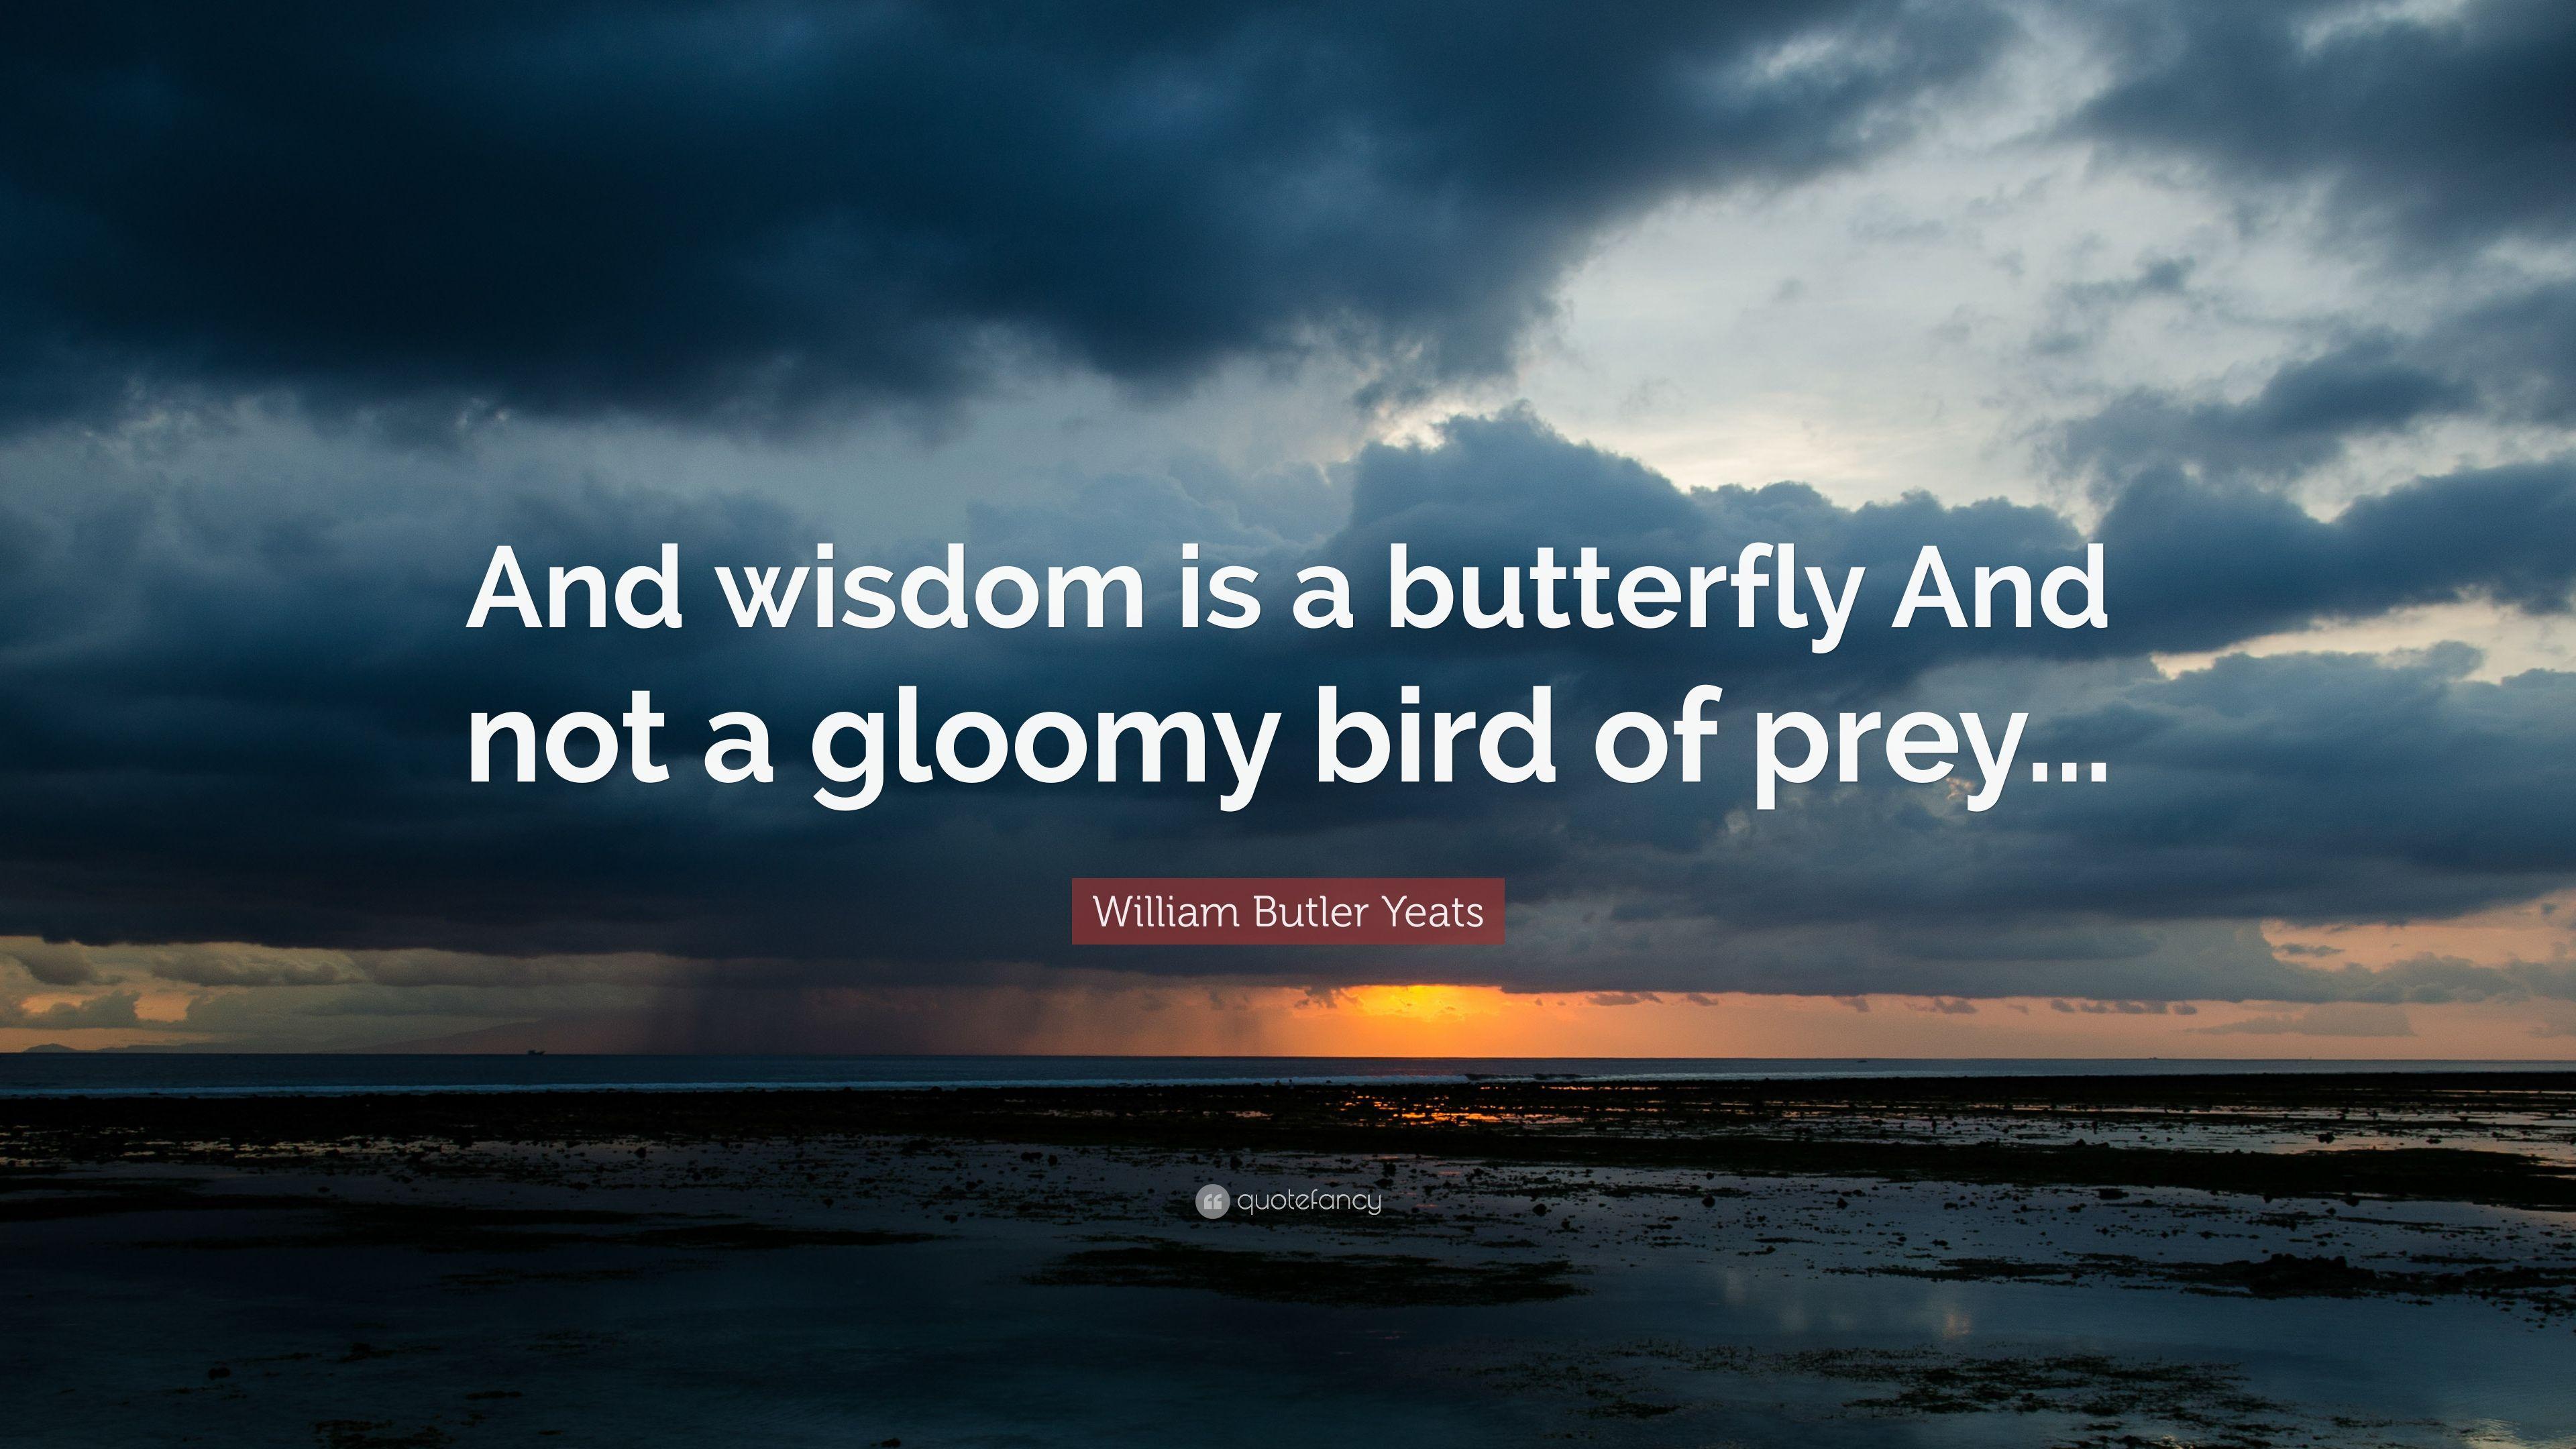 William Butler Yeats Quote: “And wisdom is a butterfly And not a